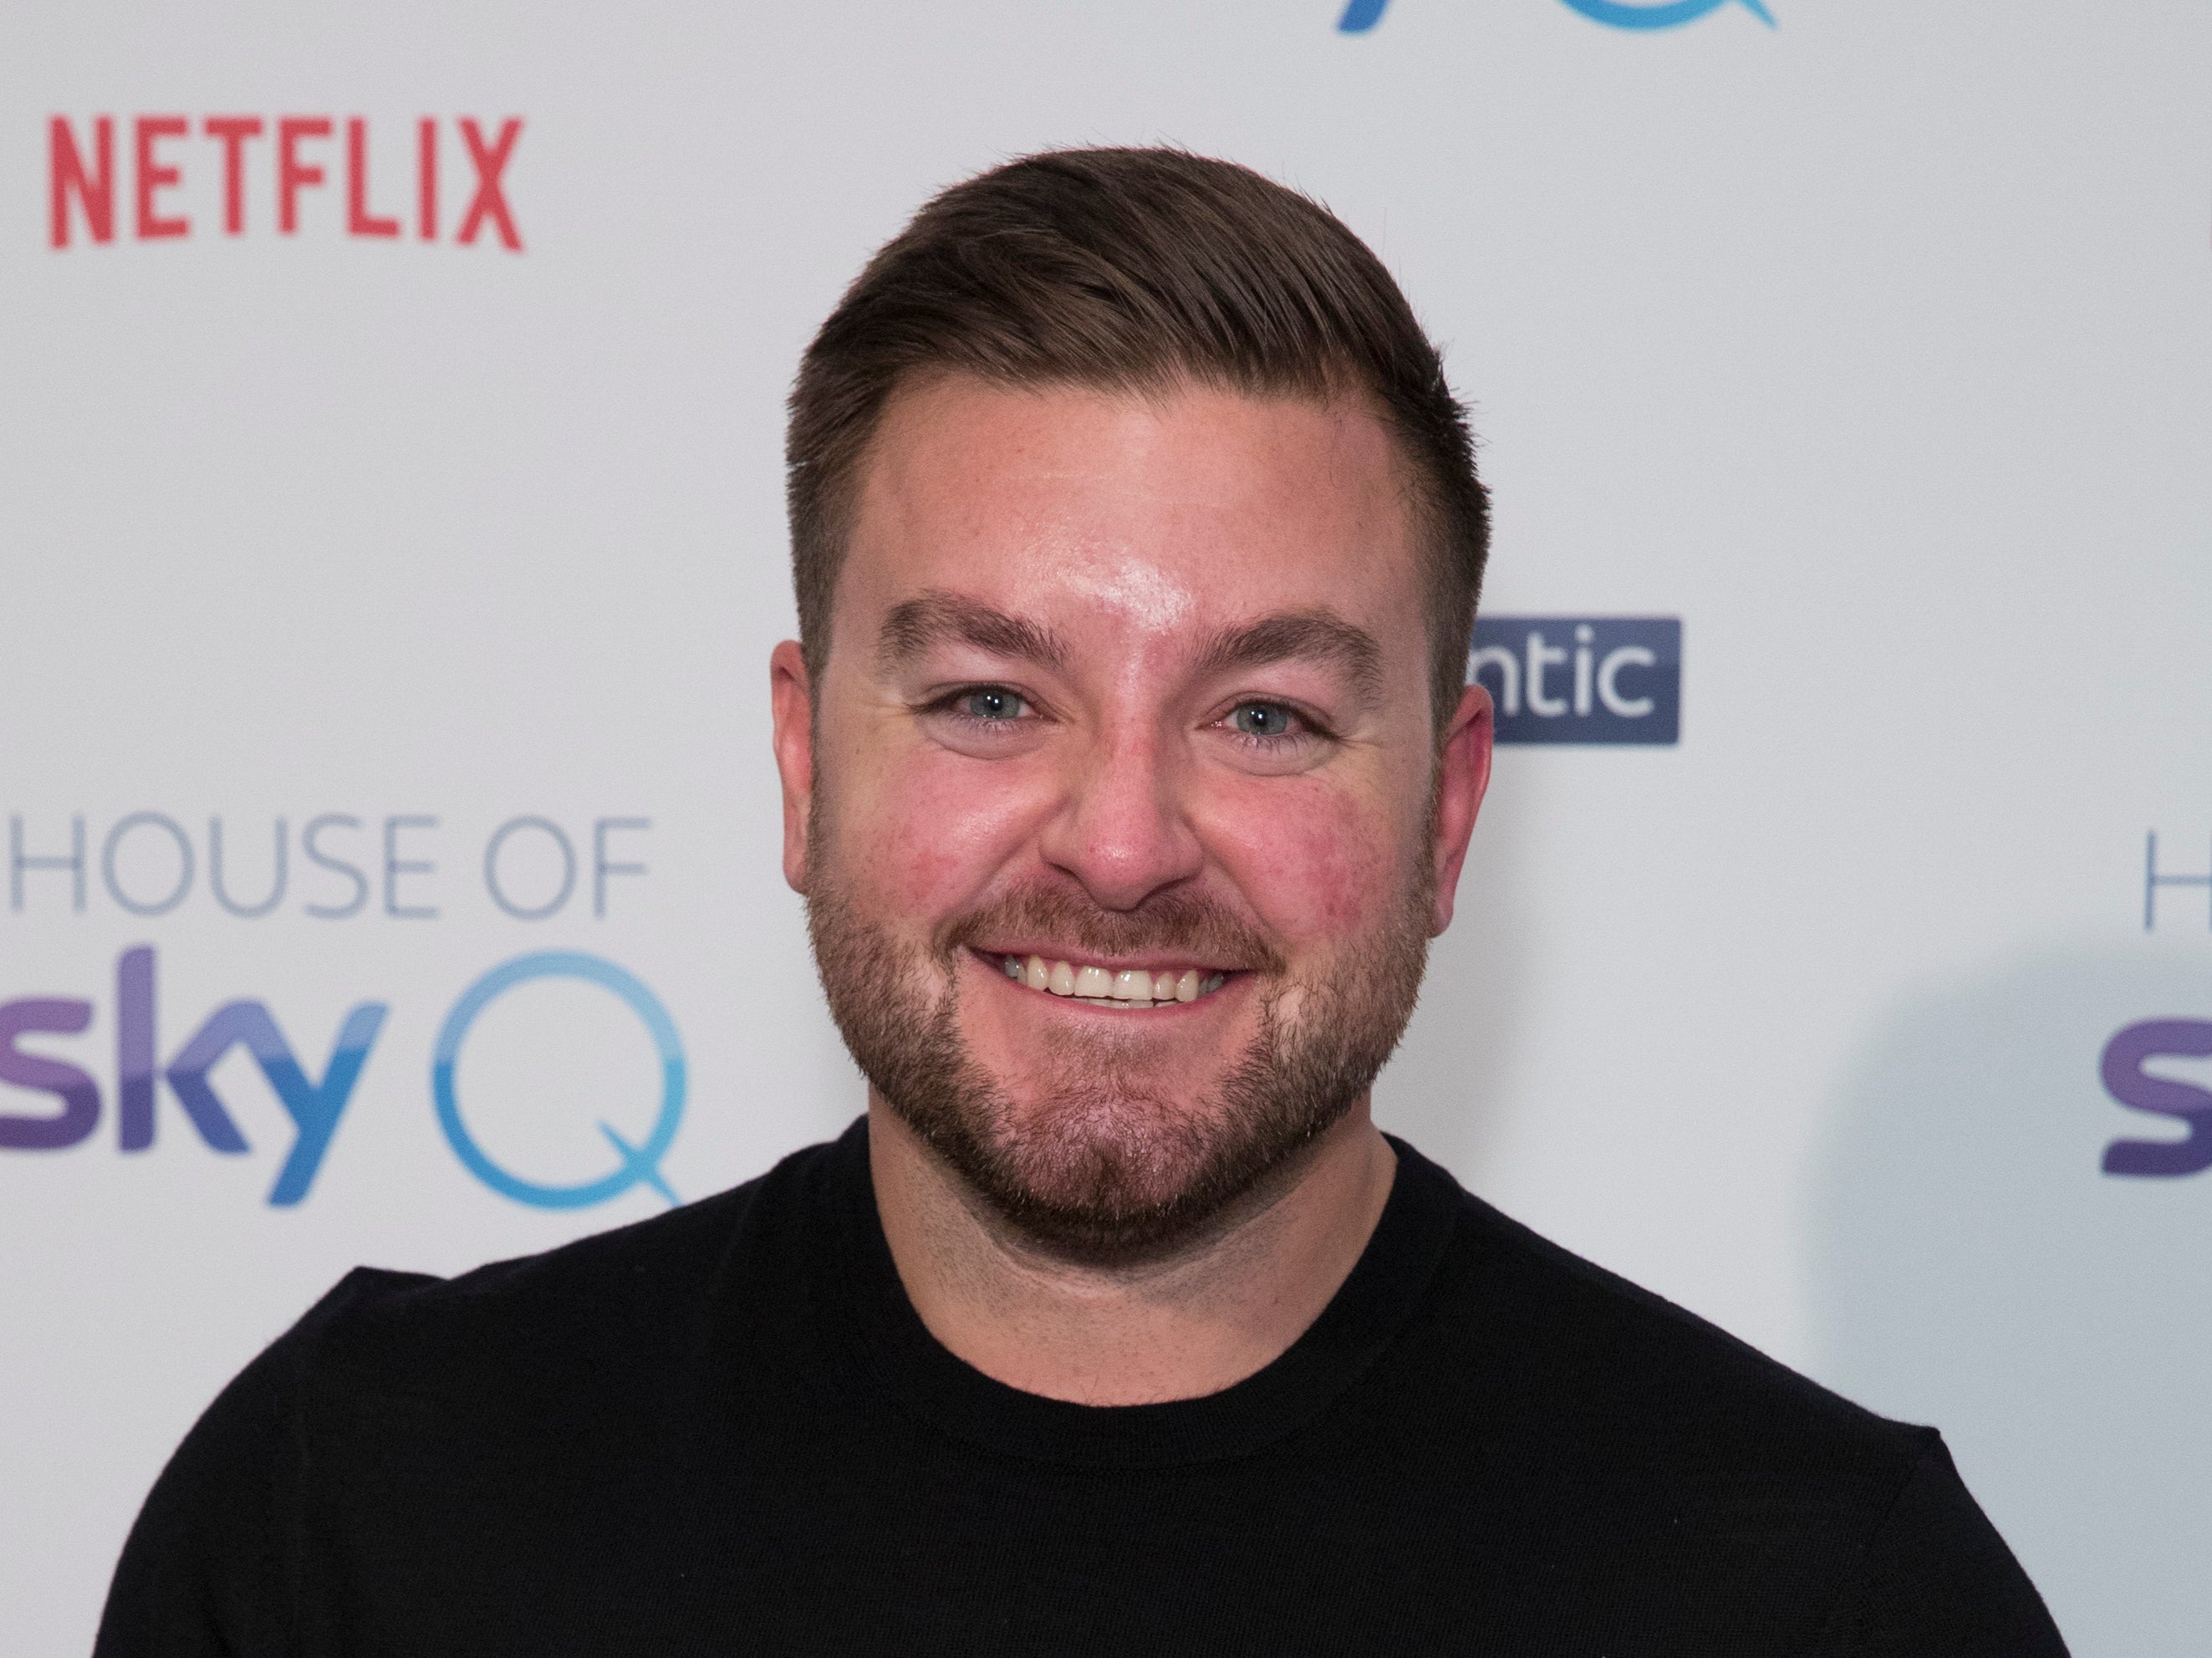 Alex Brooker pictured at the launch of the ‘House of Sky Q’ in November 2018